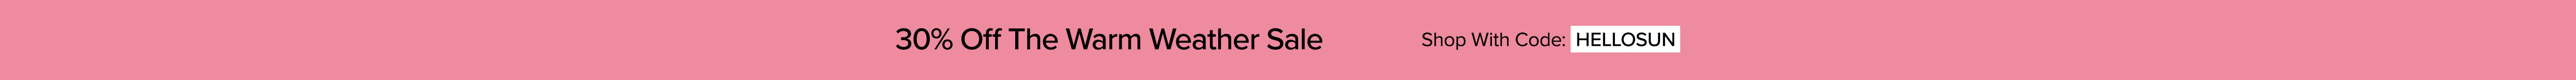 30% Off The Warm Weather Sale